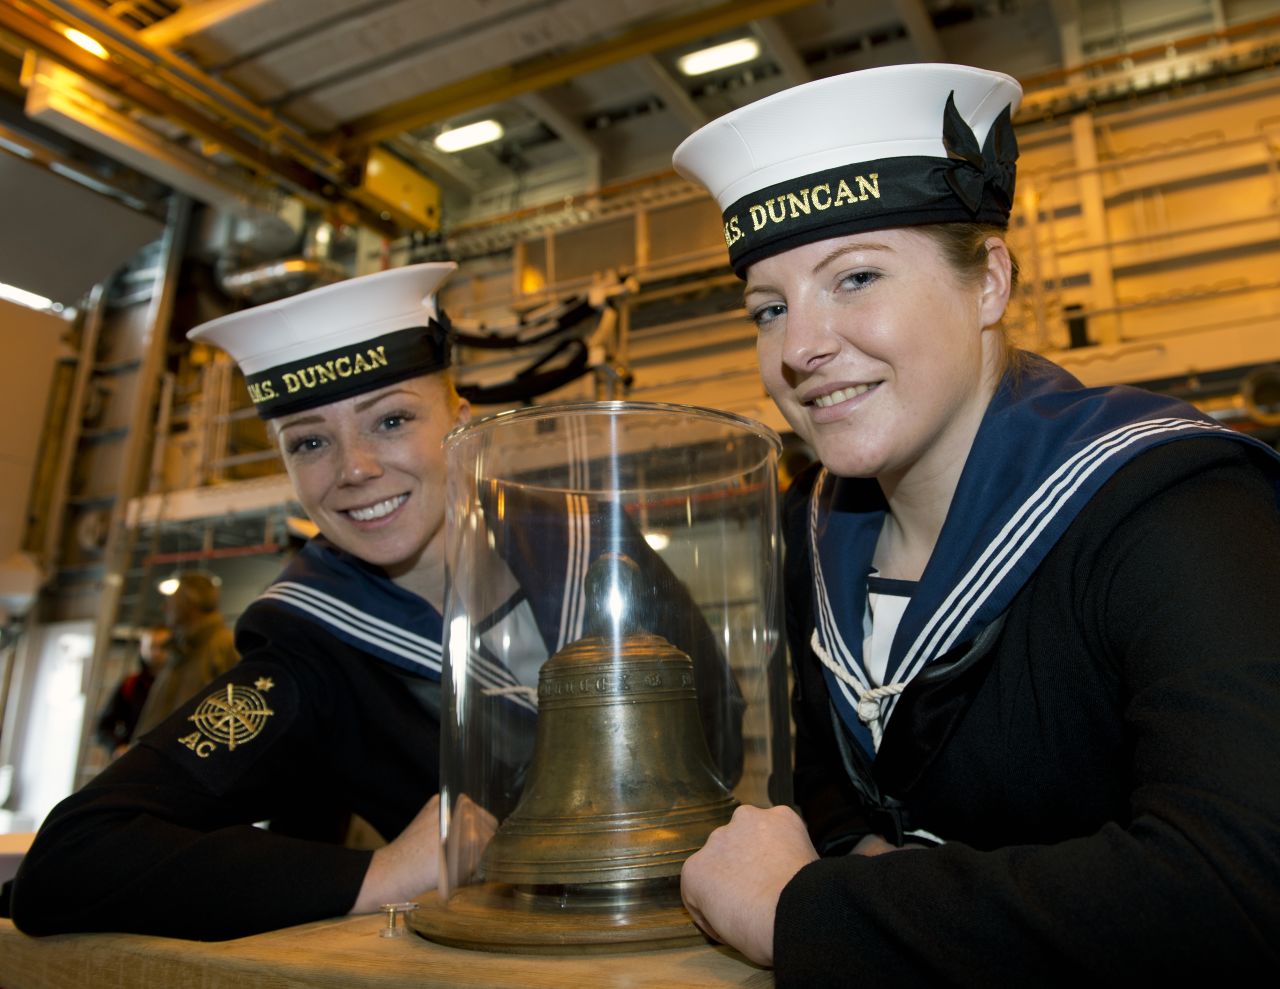 Able Seaman Fiona MacLennan, left, and Able Seaman Megan Ryan attend the opening ceremony aboard HMS Duncan, the latest Type 45 destroyer.